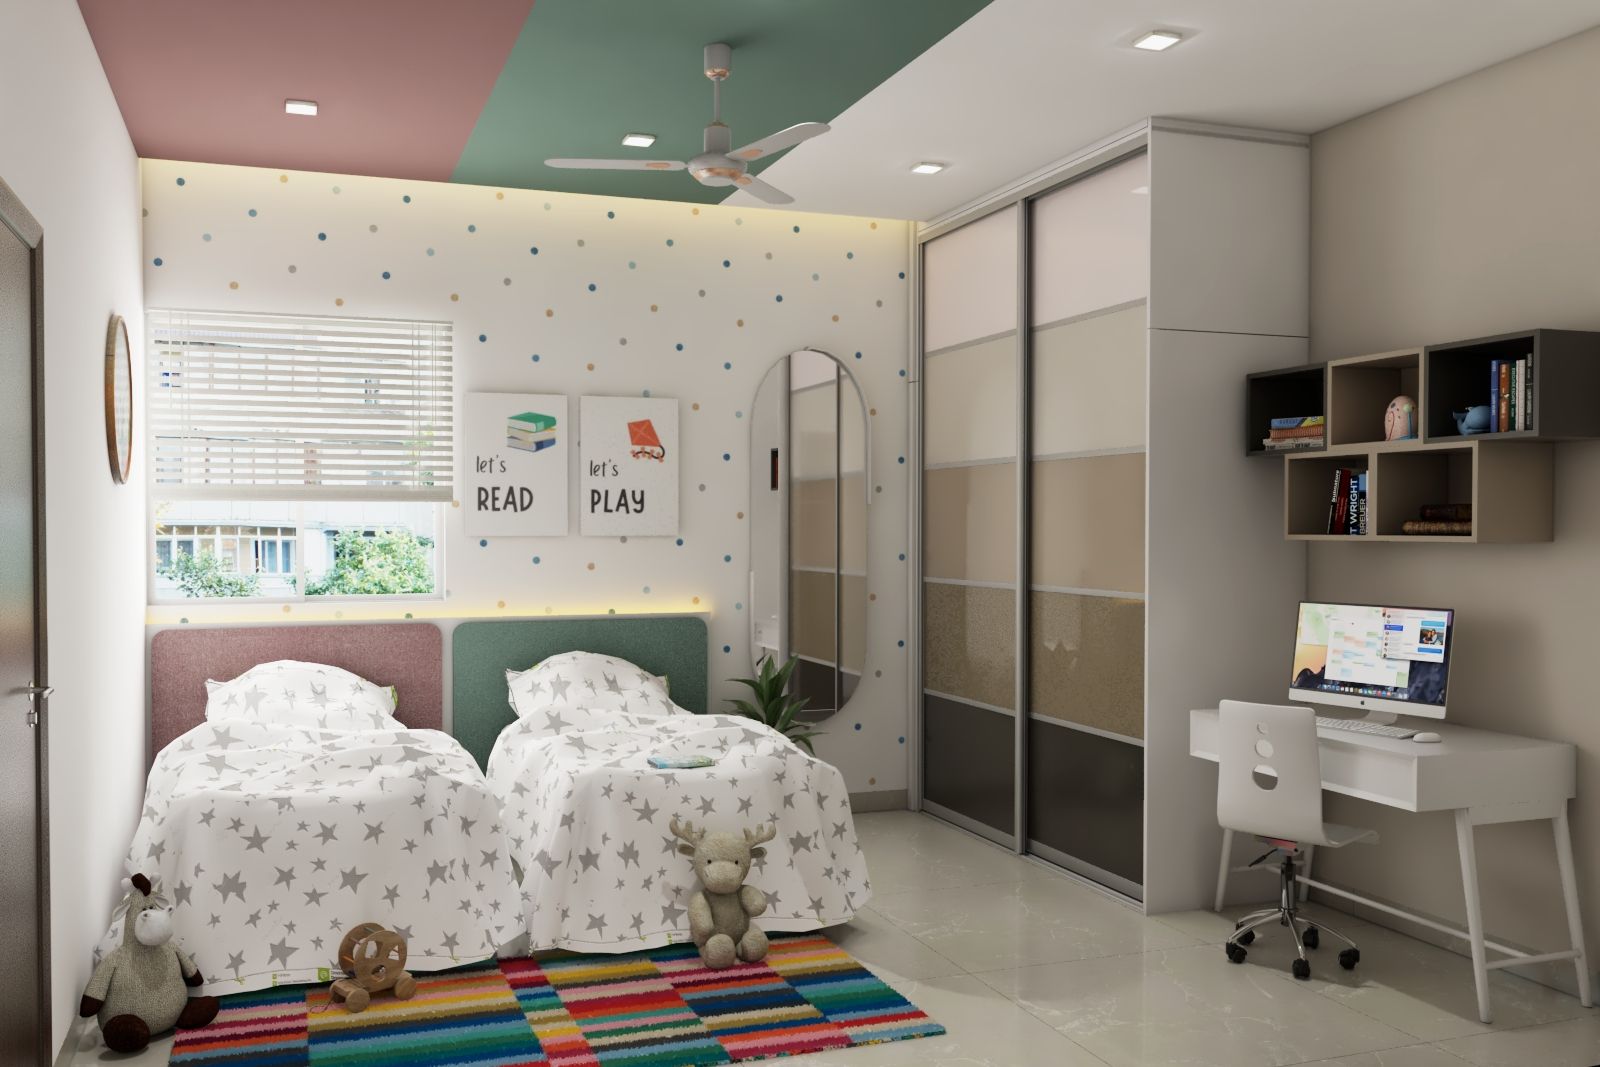 Modern Kids Room Design With Two Single Cots And Bright Cove Lighting